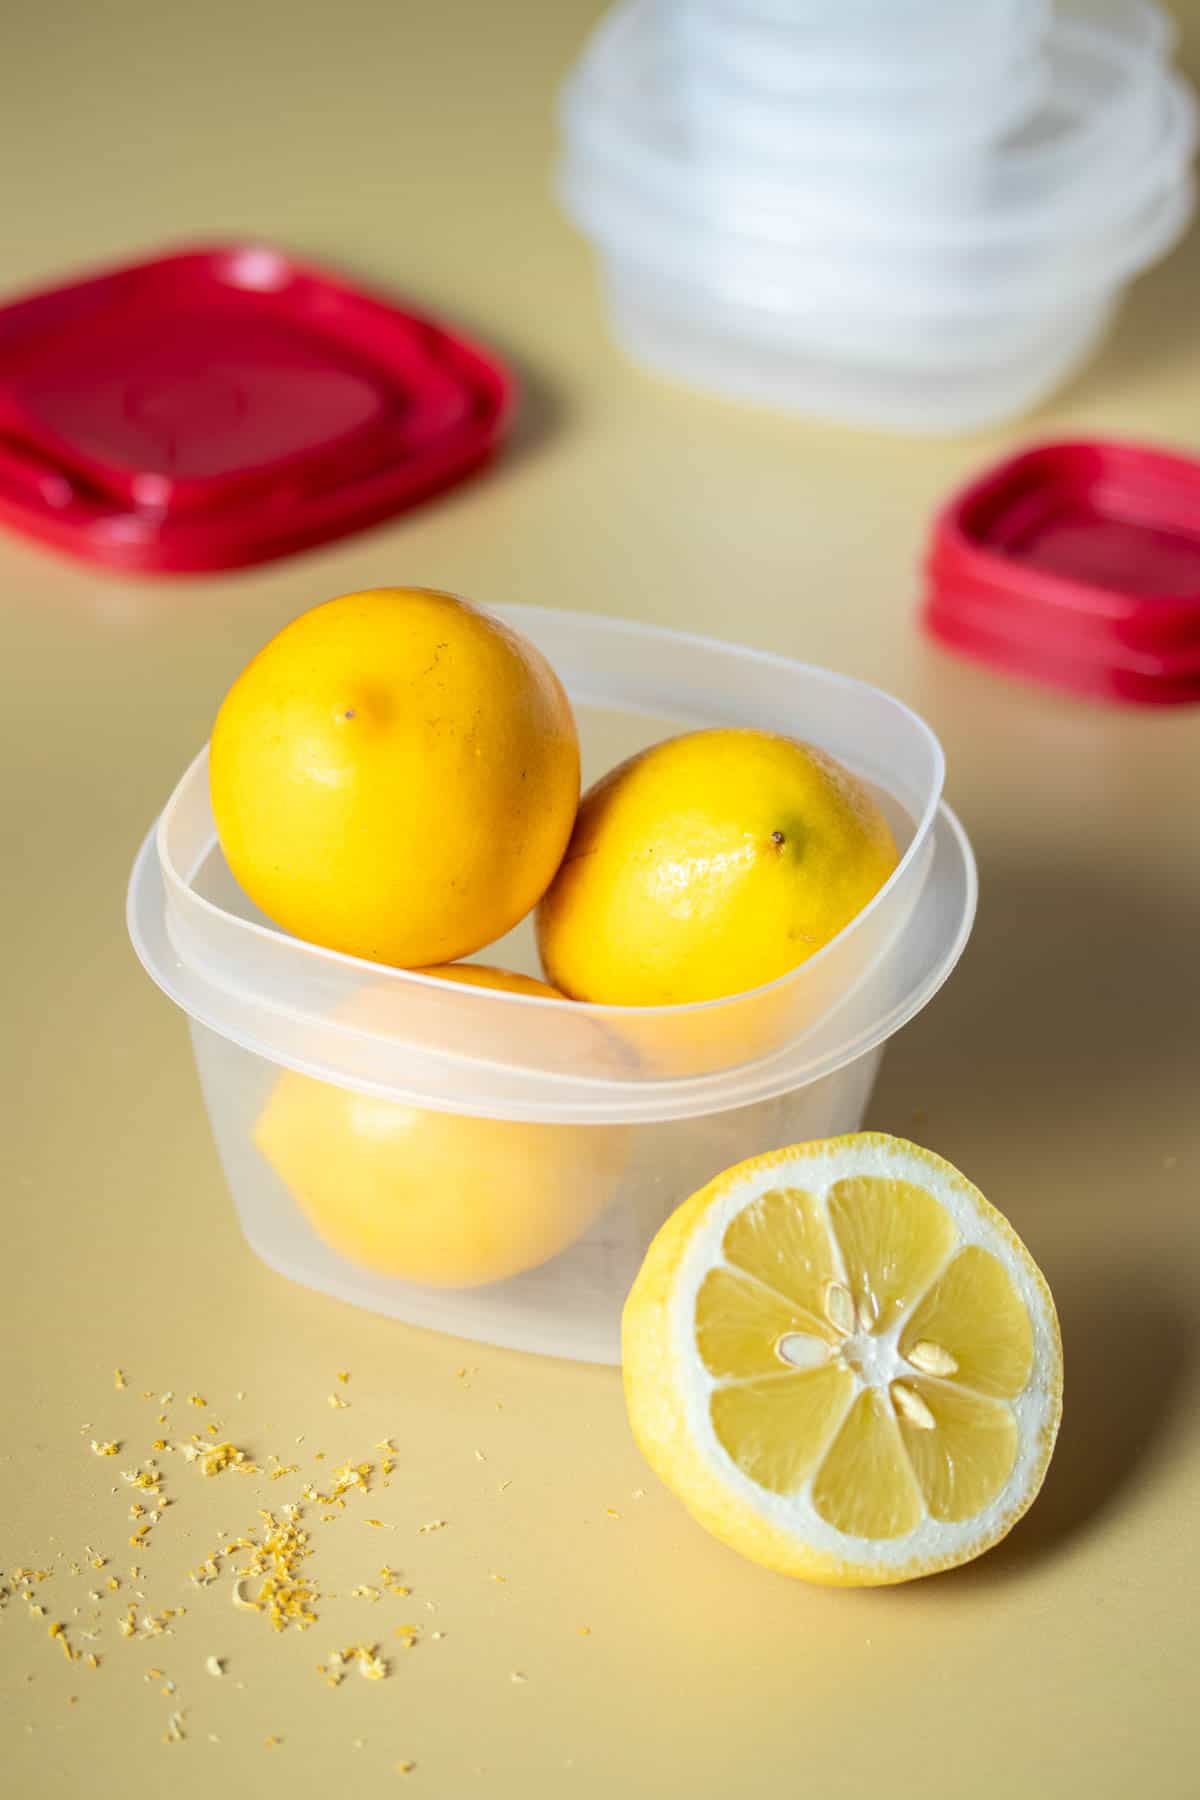 A plastic container filled with lemons and a half lemon in front of it with more containers in the background.